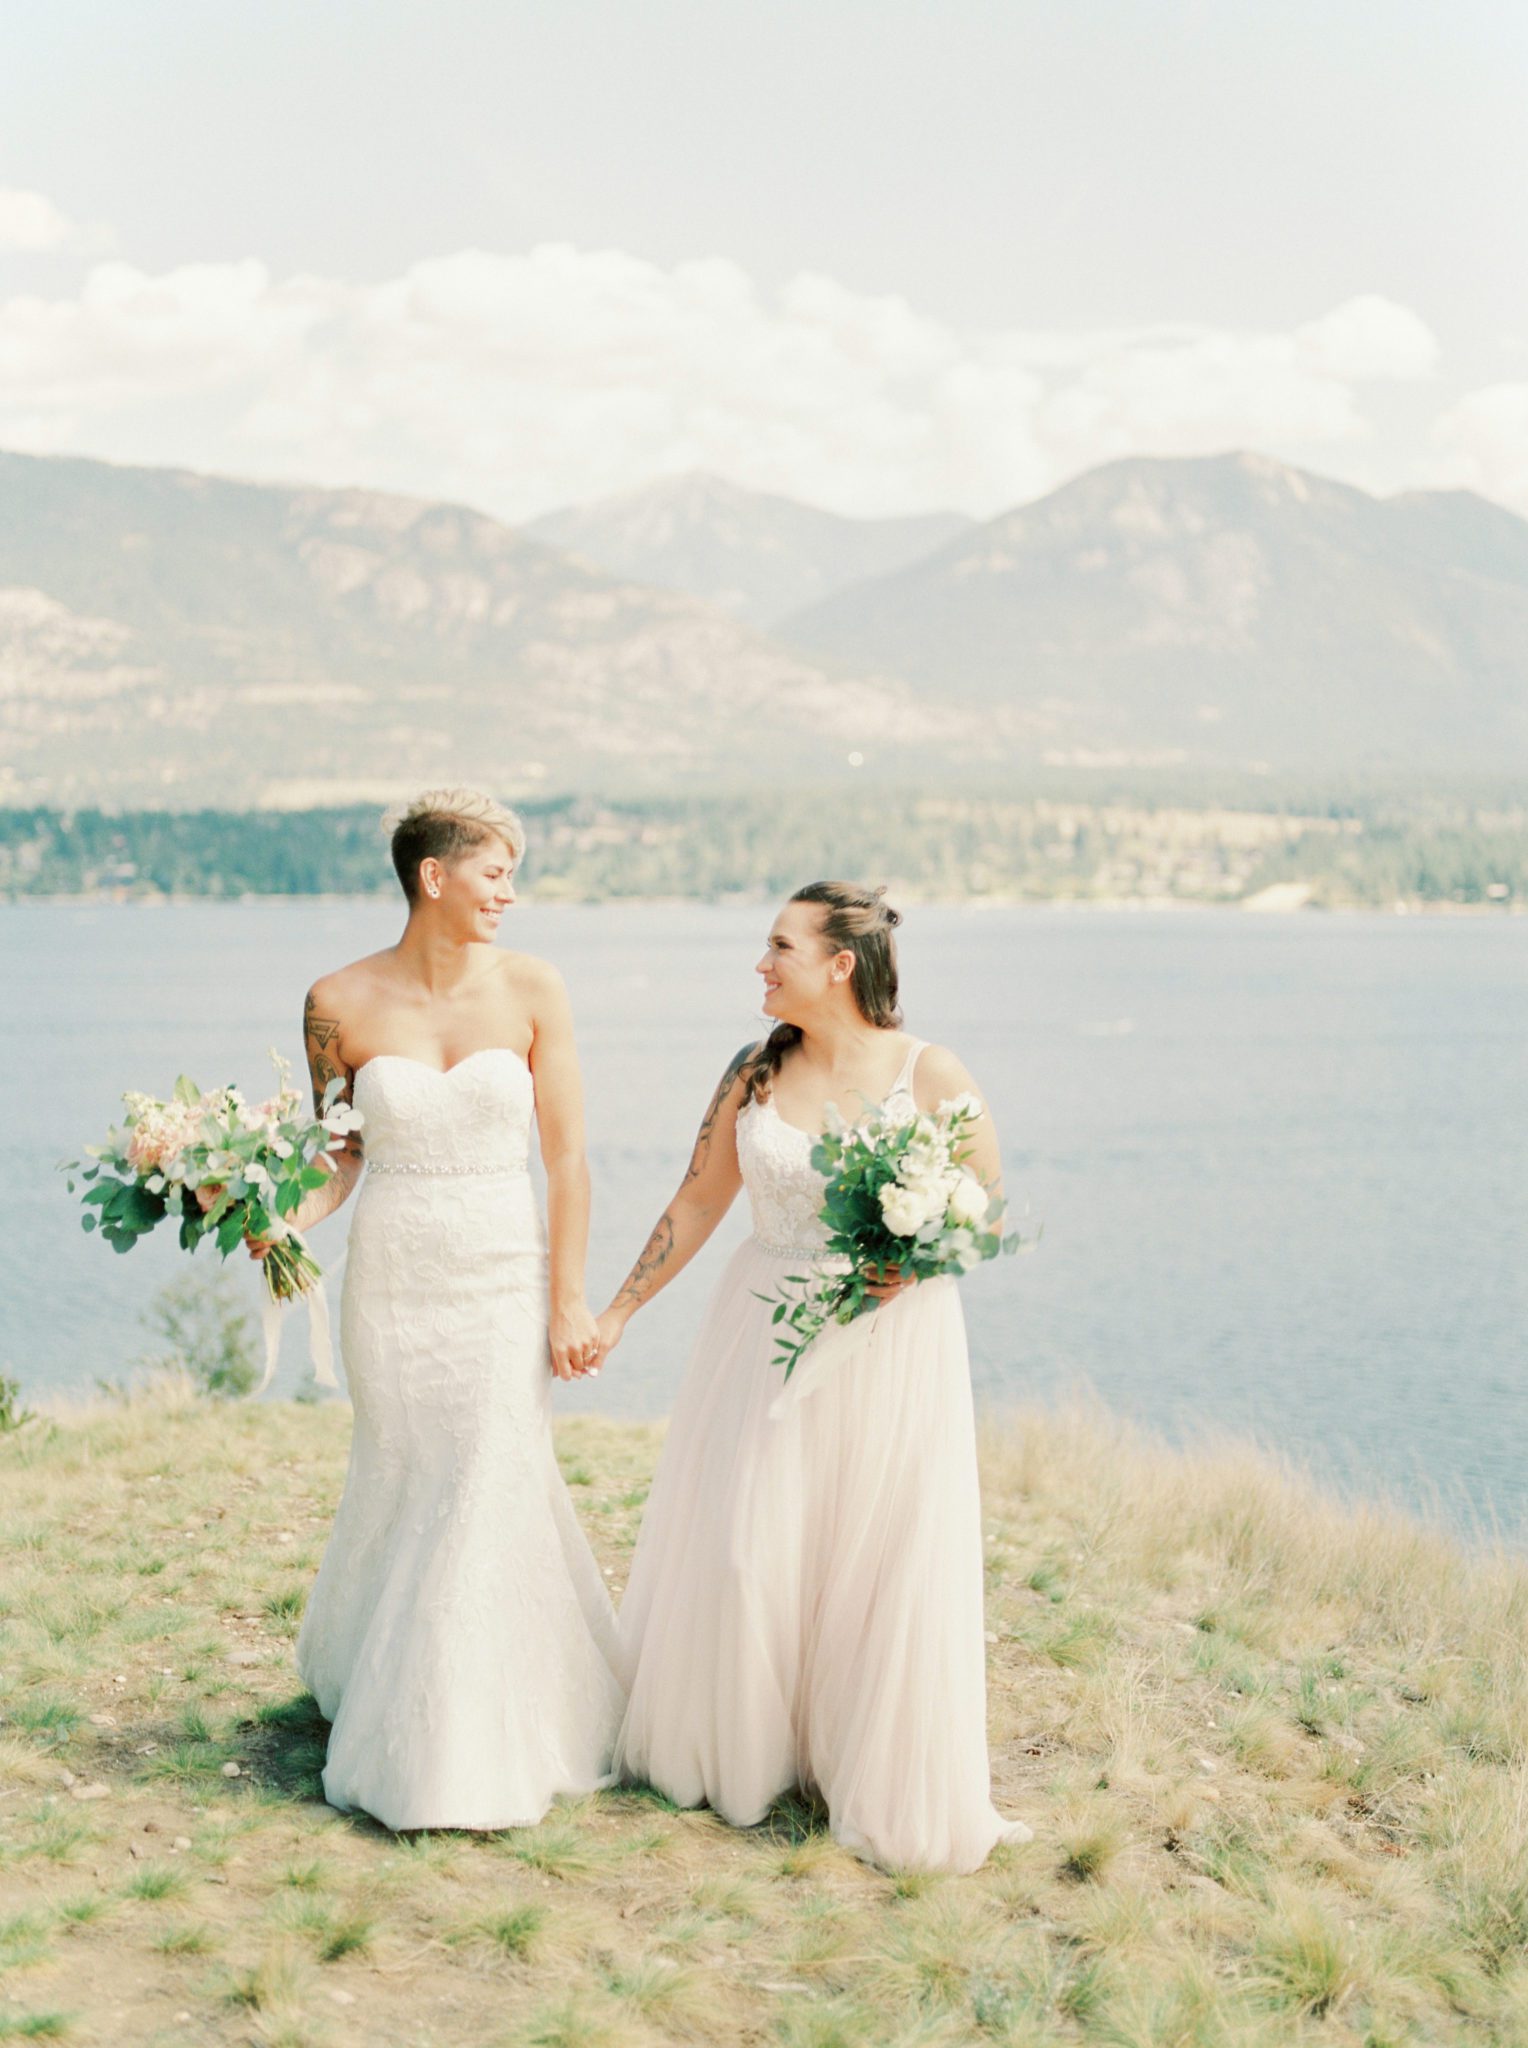 Bright and Airy wedding photography inspiration